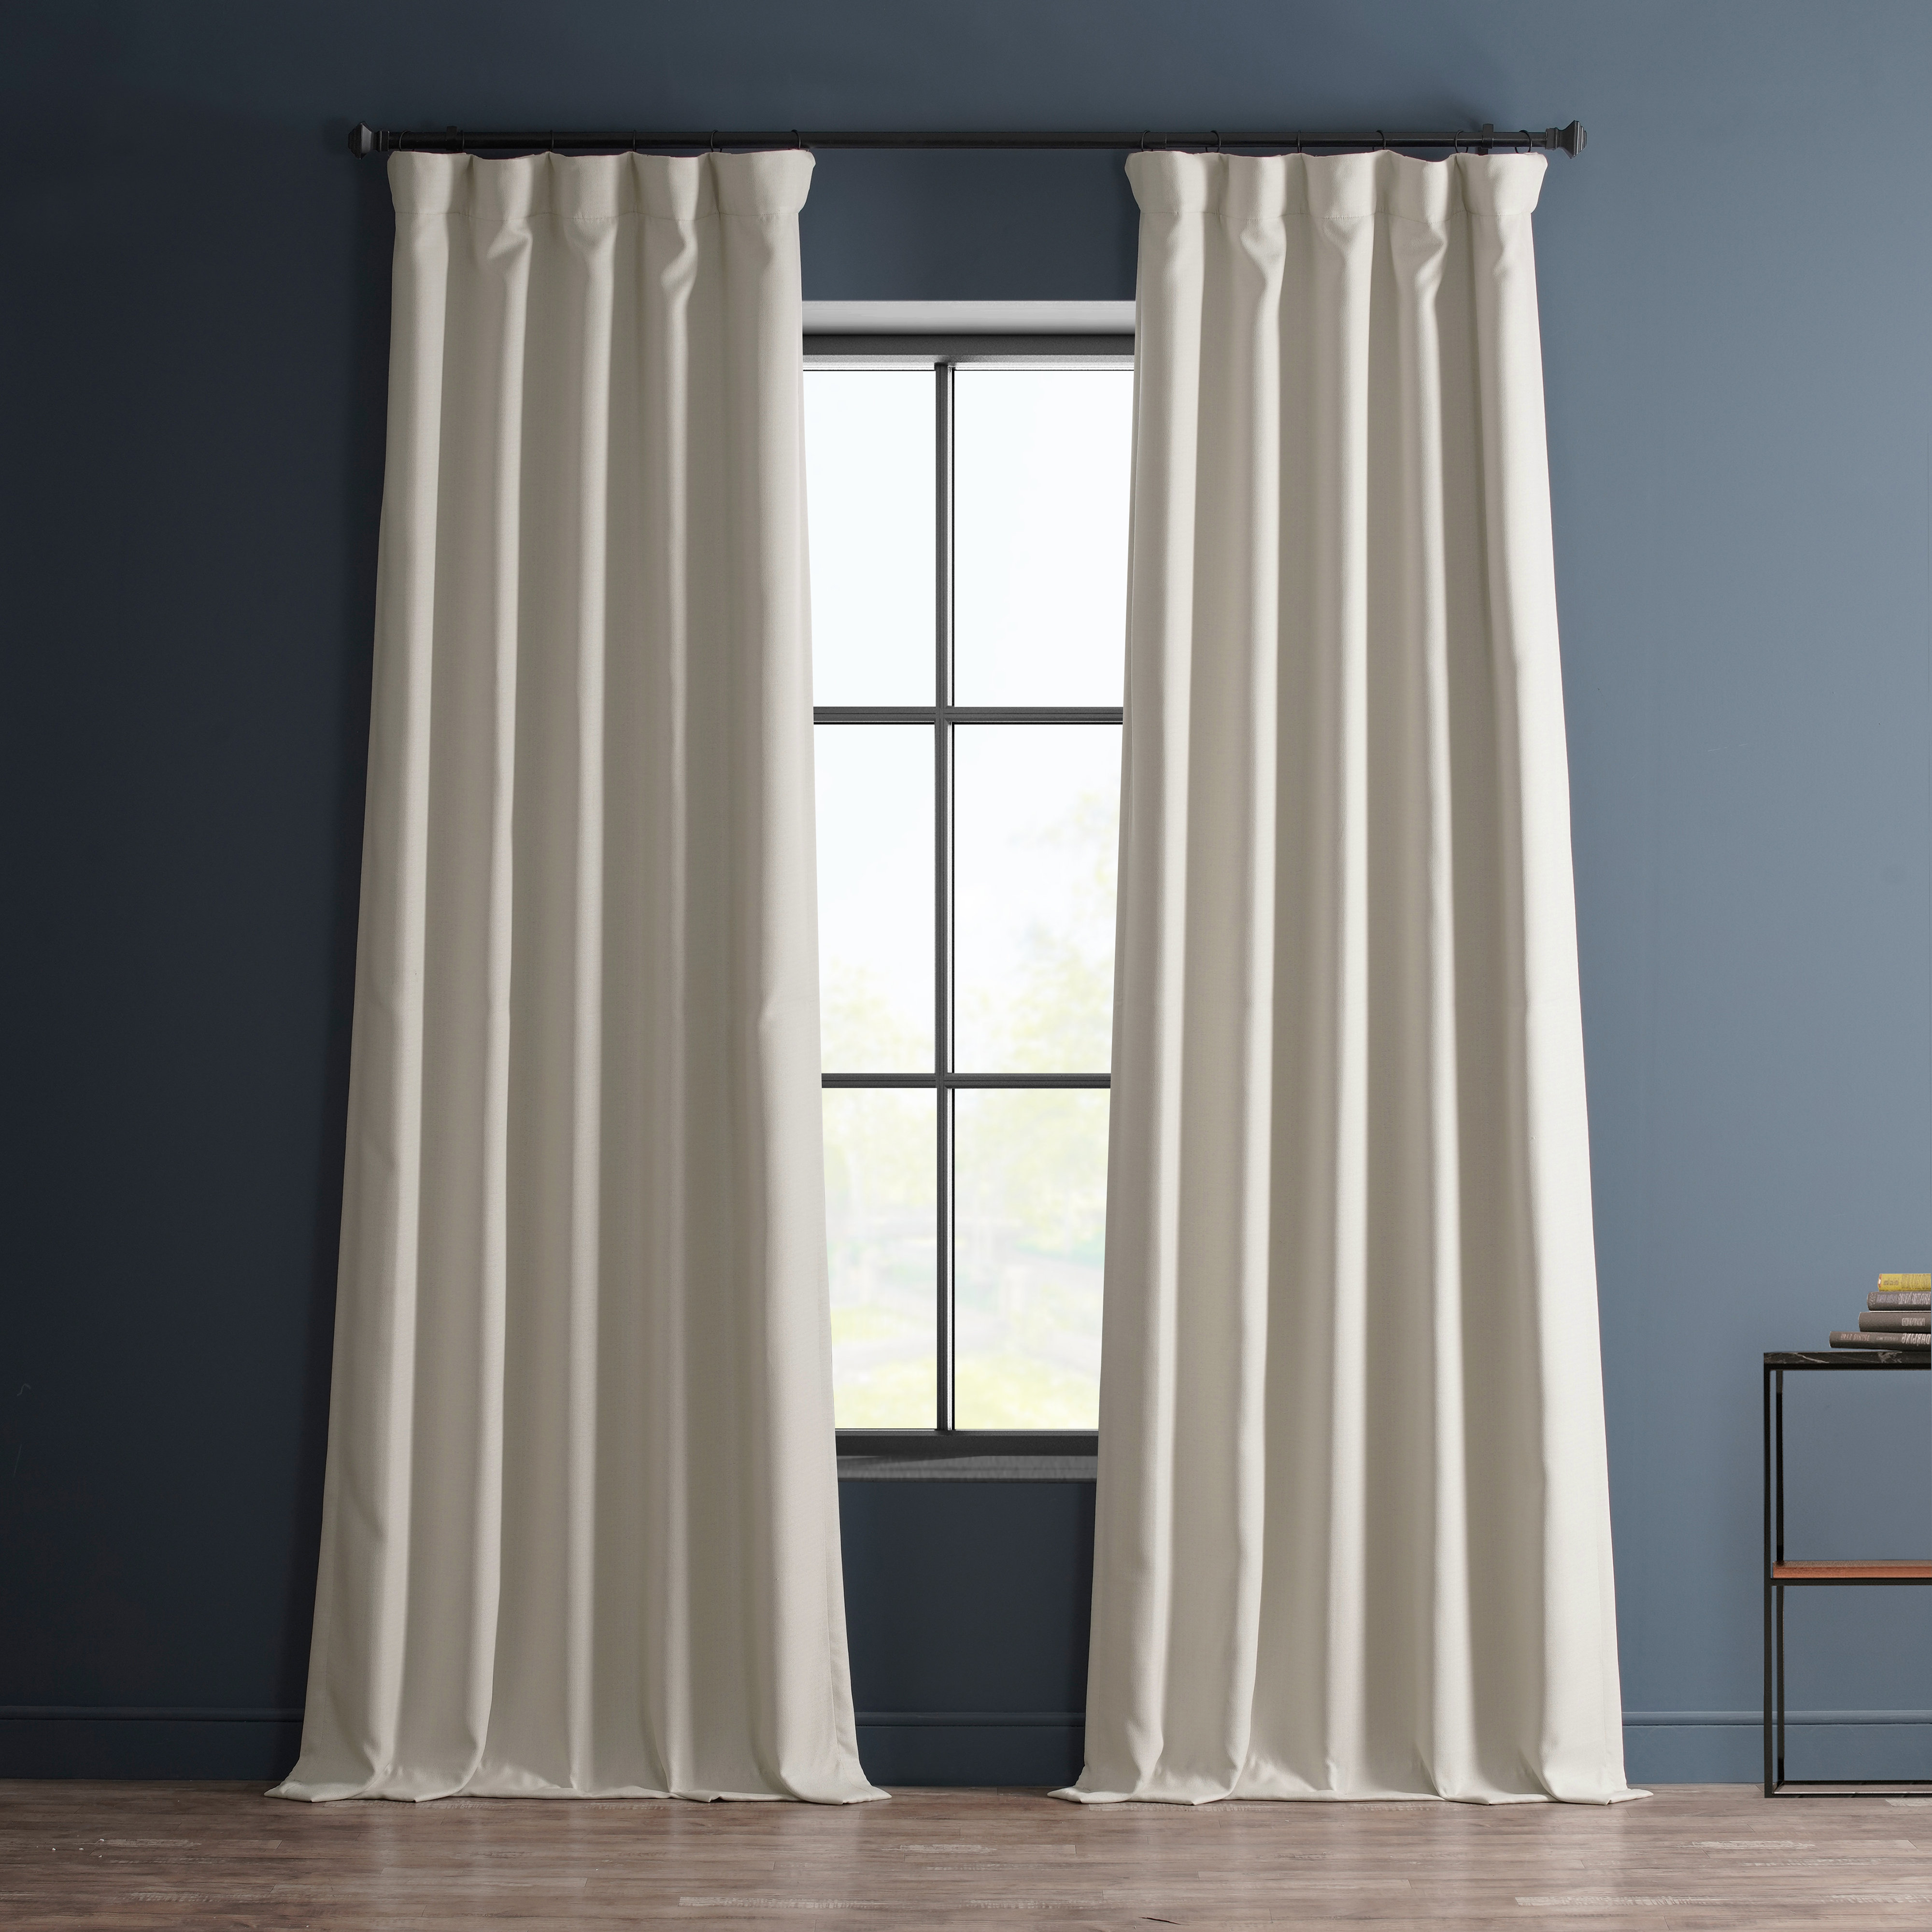 Blackout curtains — 5 reasons to buy and 4 to skip